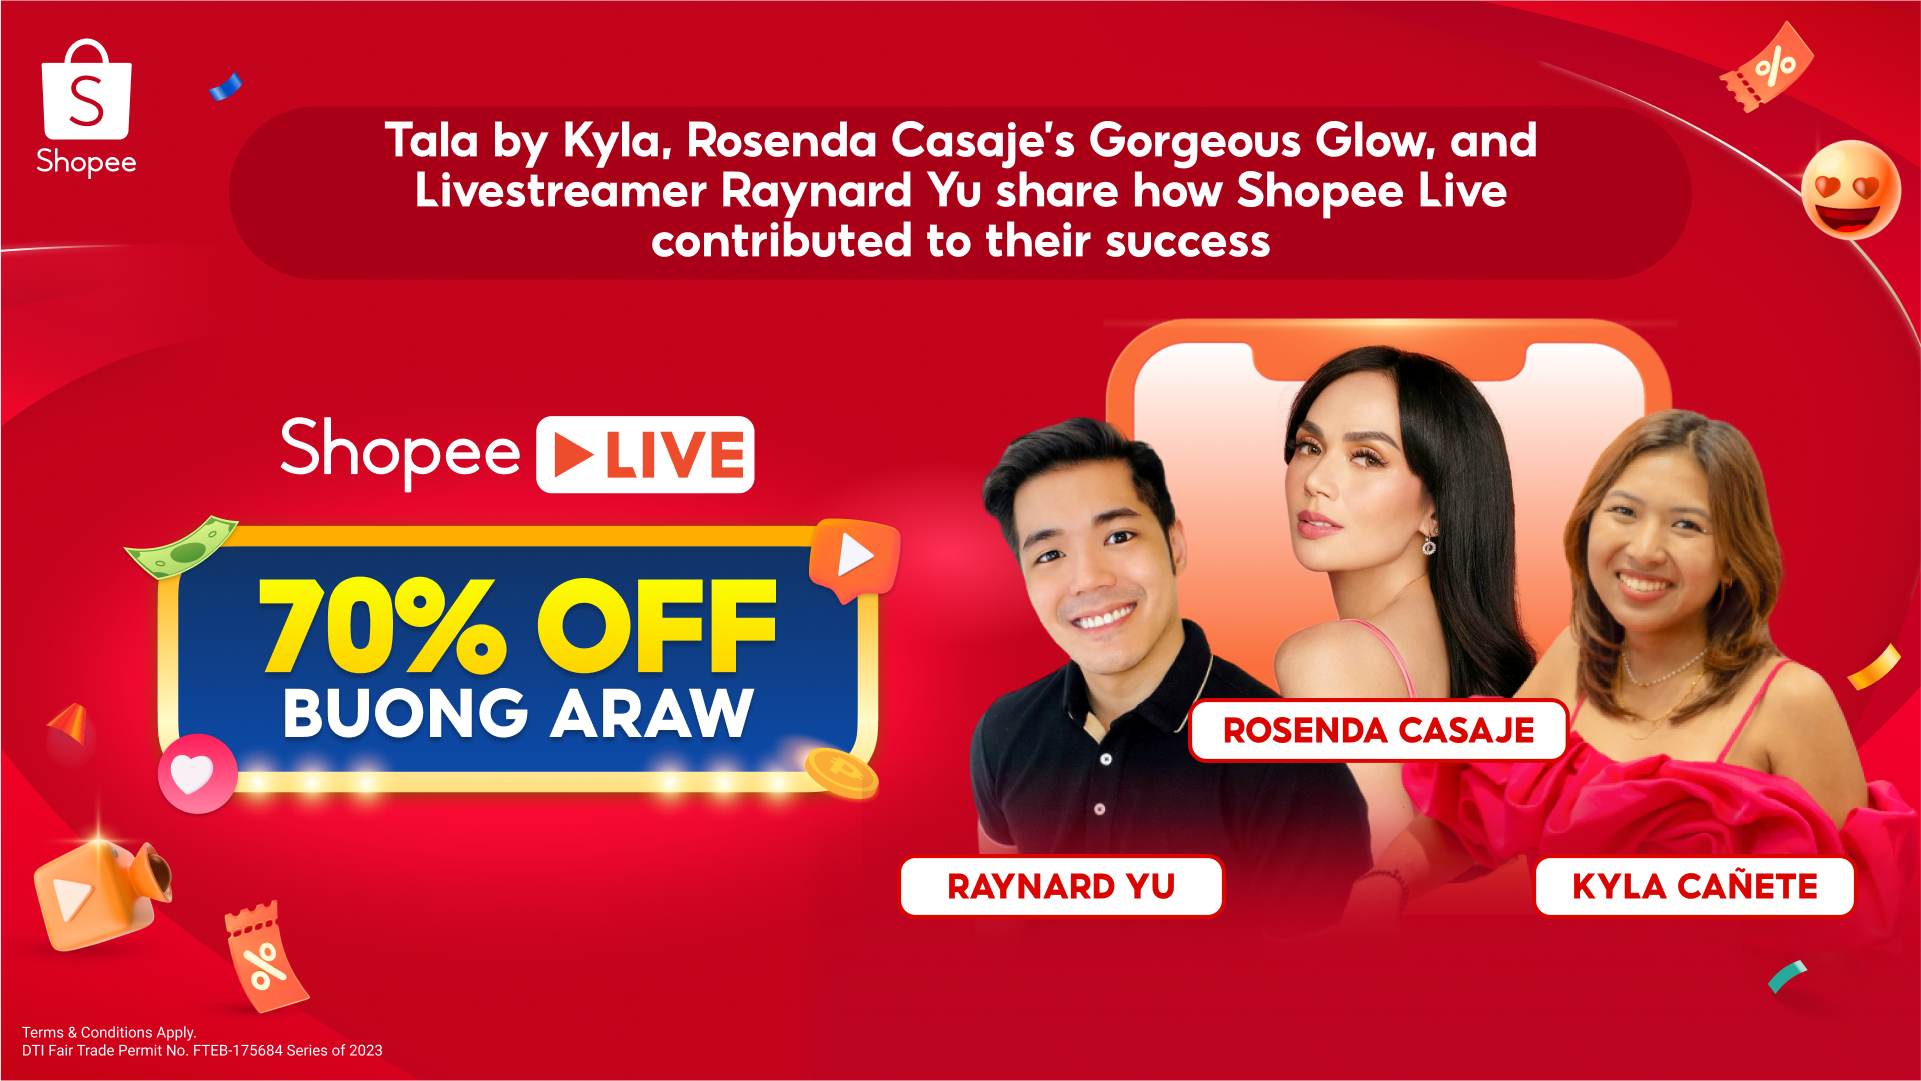 Tala by Kyla, Rosenda Casaje’s Gorgeous Glow, and Livestreamer Raynard Yu spill secrets on how Shopee Live became a gamechanger to their e-commerce success